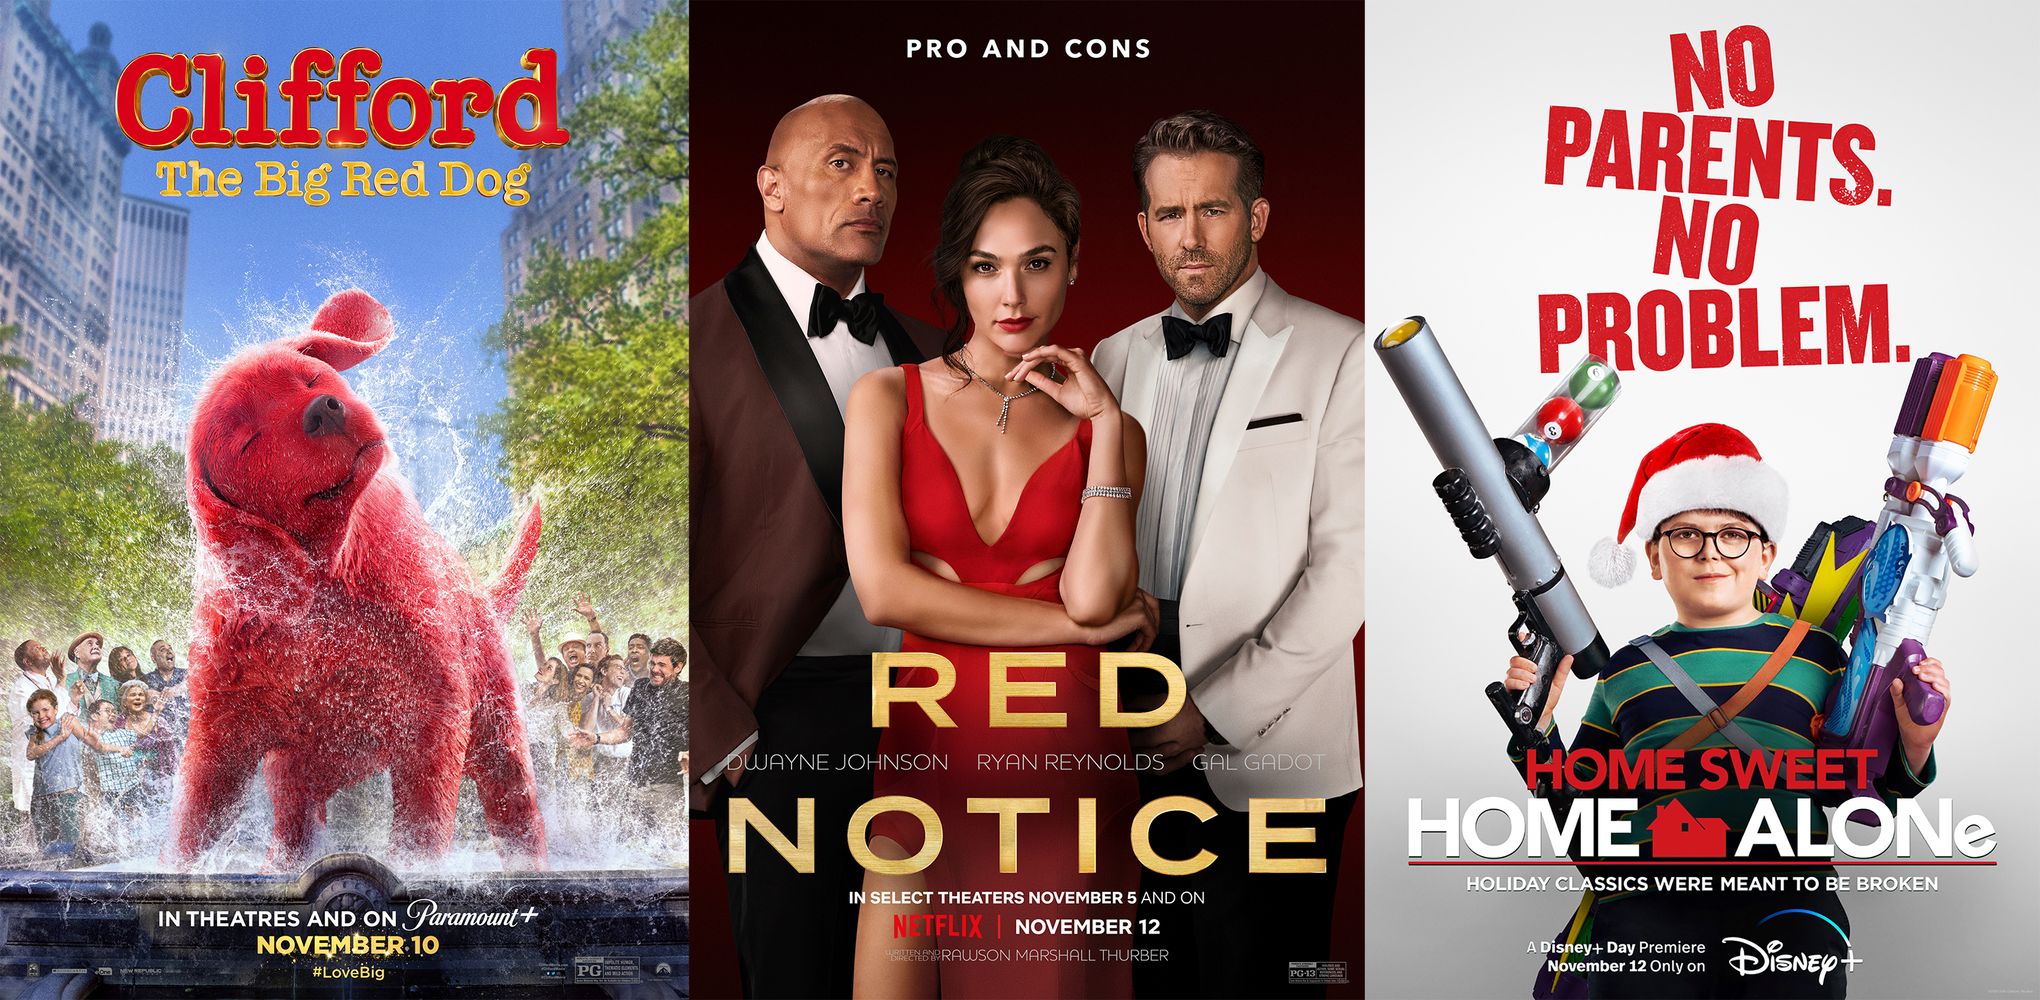 Netflix's Red Notice: Is The Rock's new movie a blockbuster?